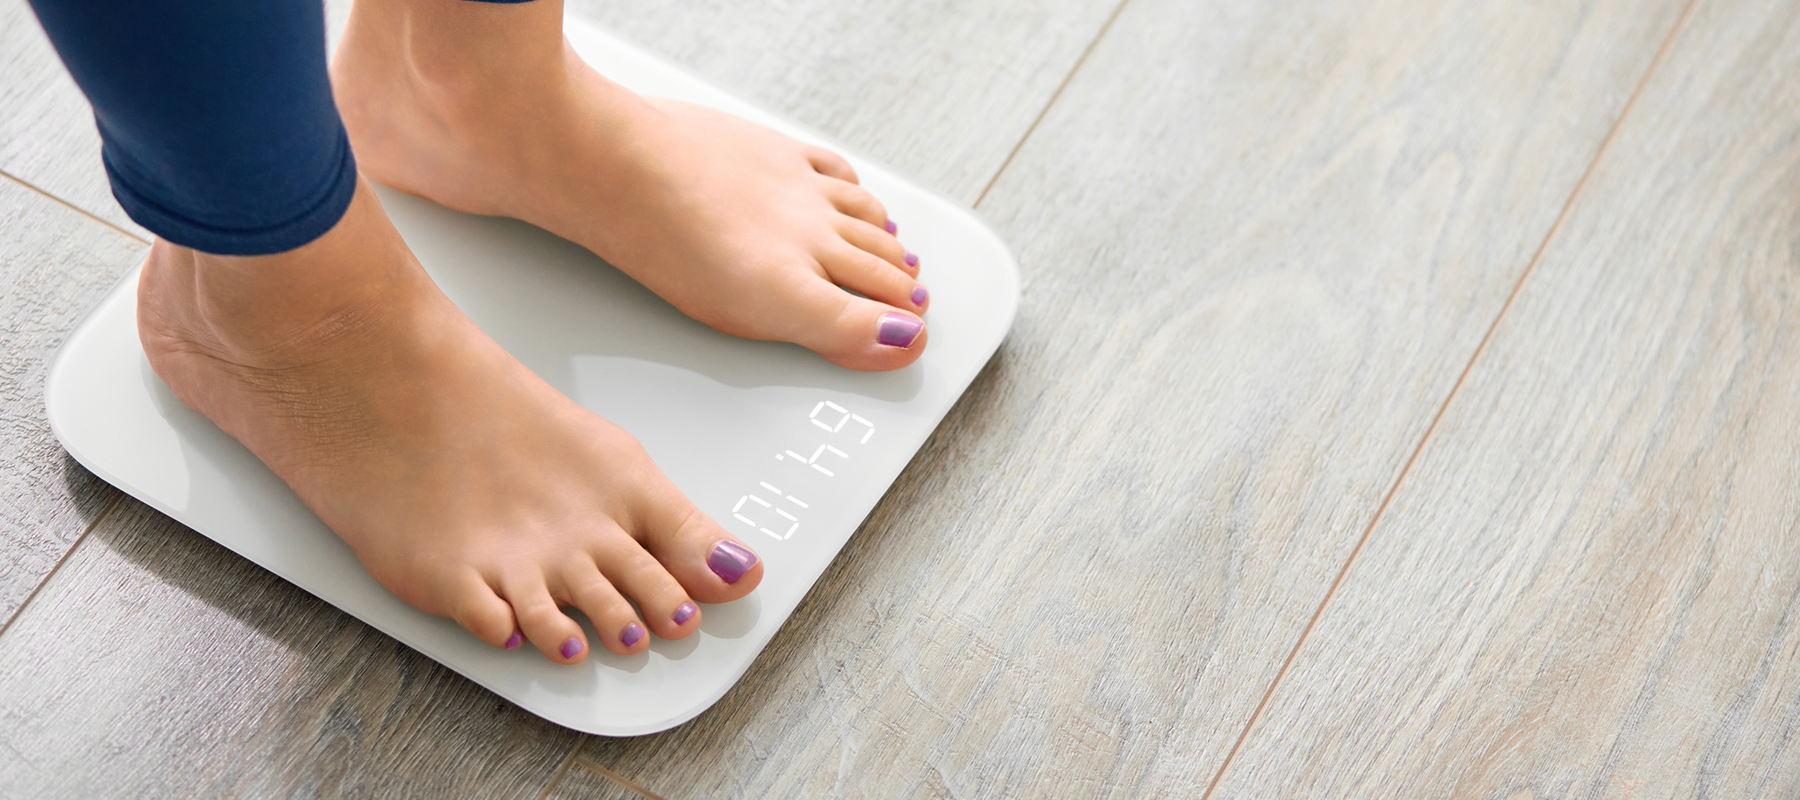 Weight Scales